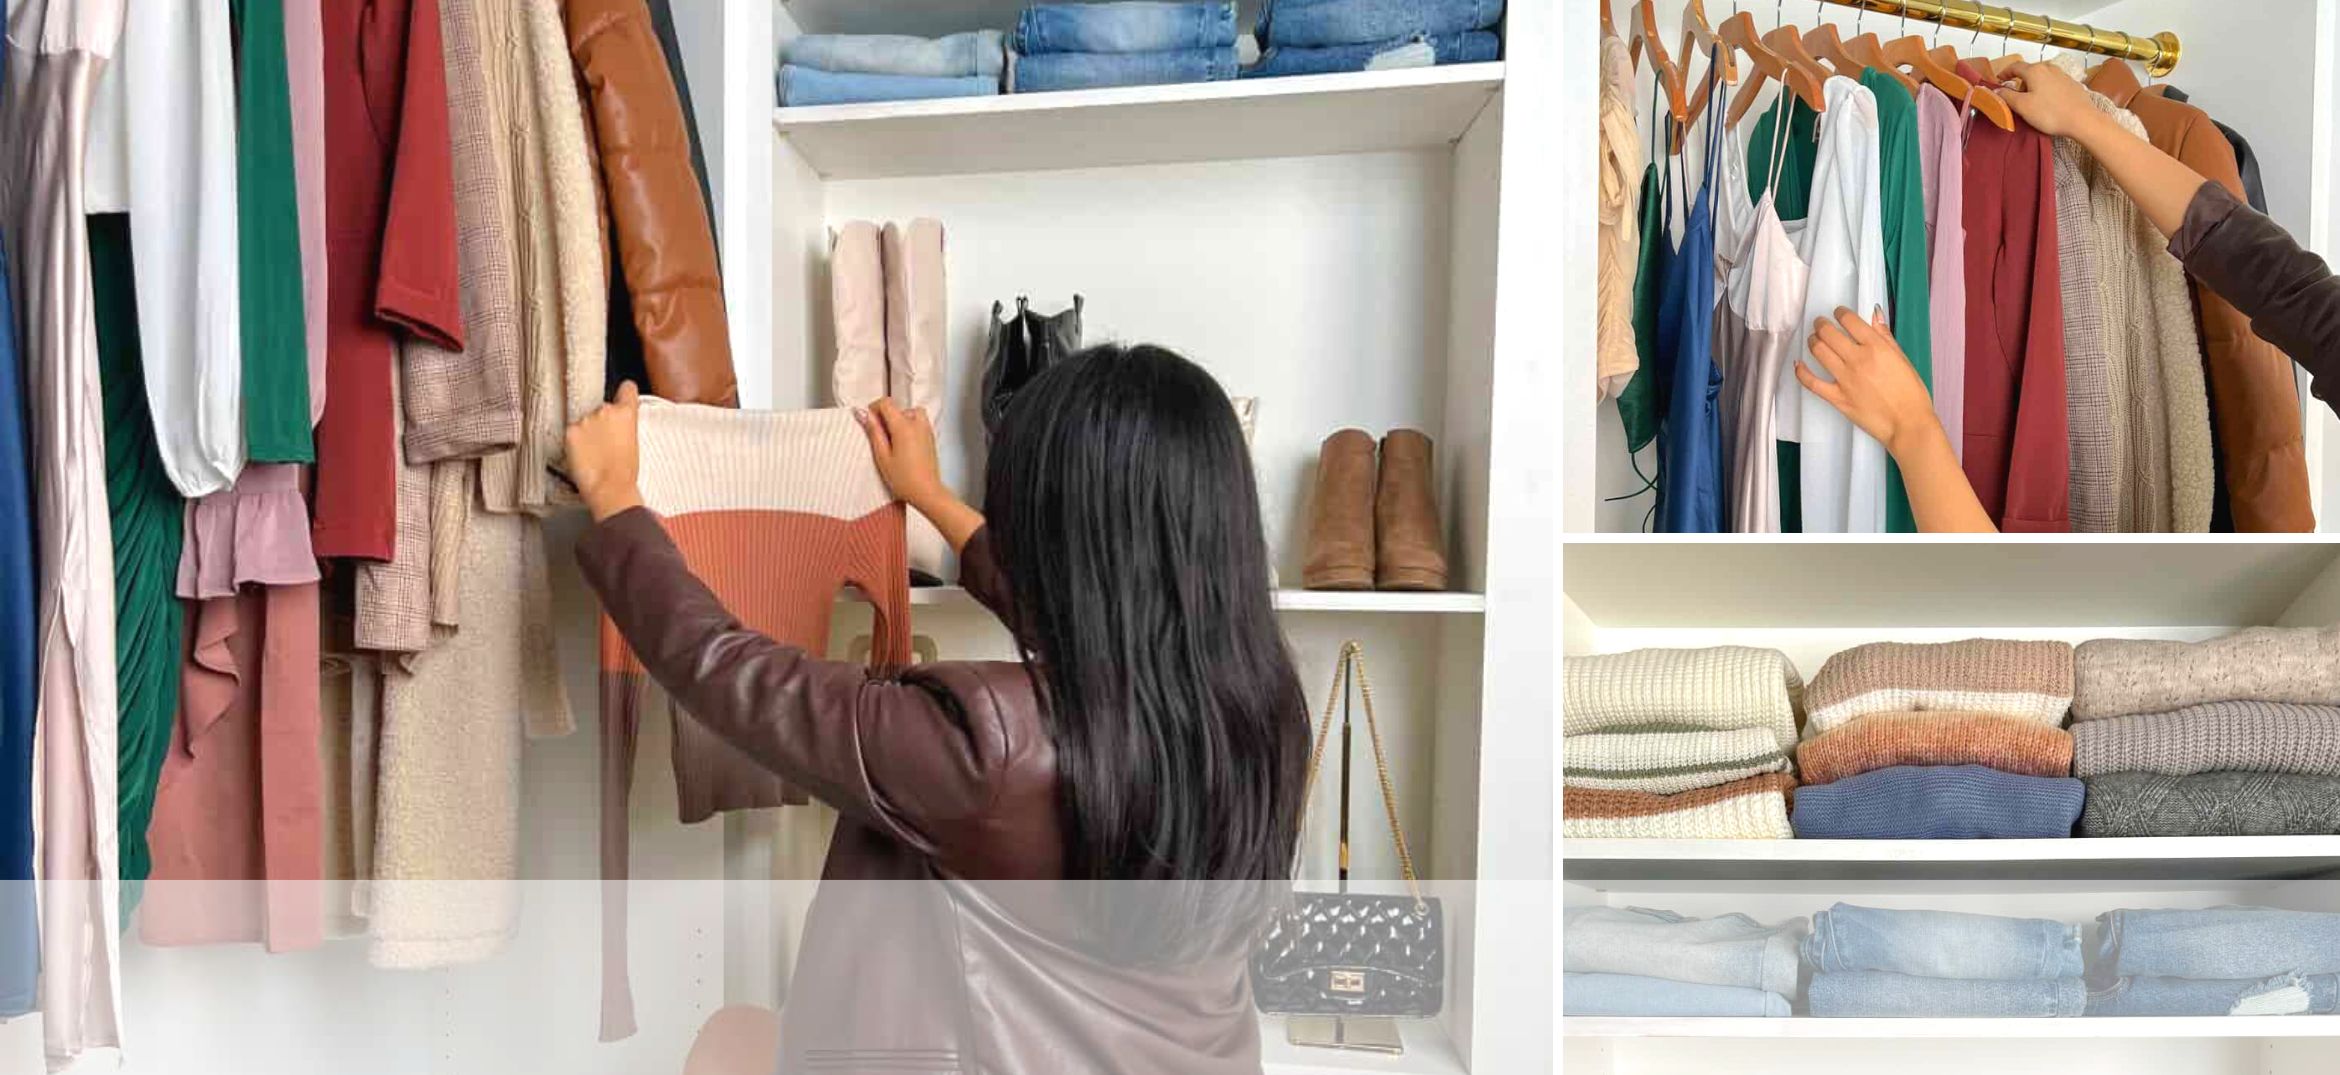 Maximize Closet Space with Hanging Organizers